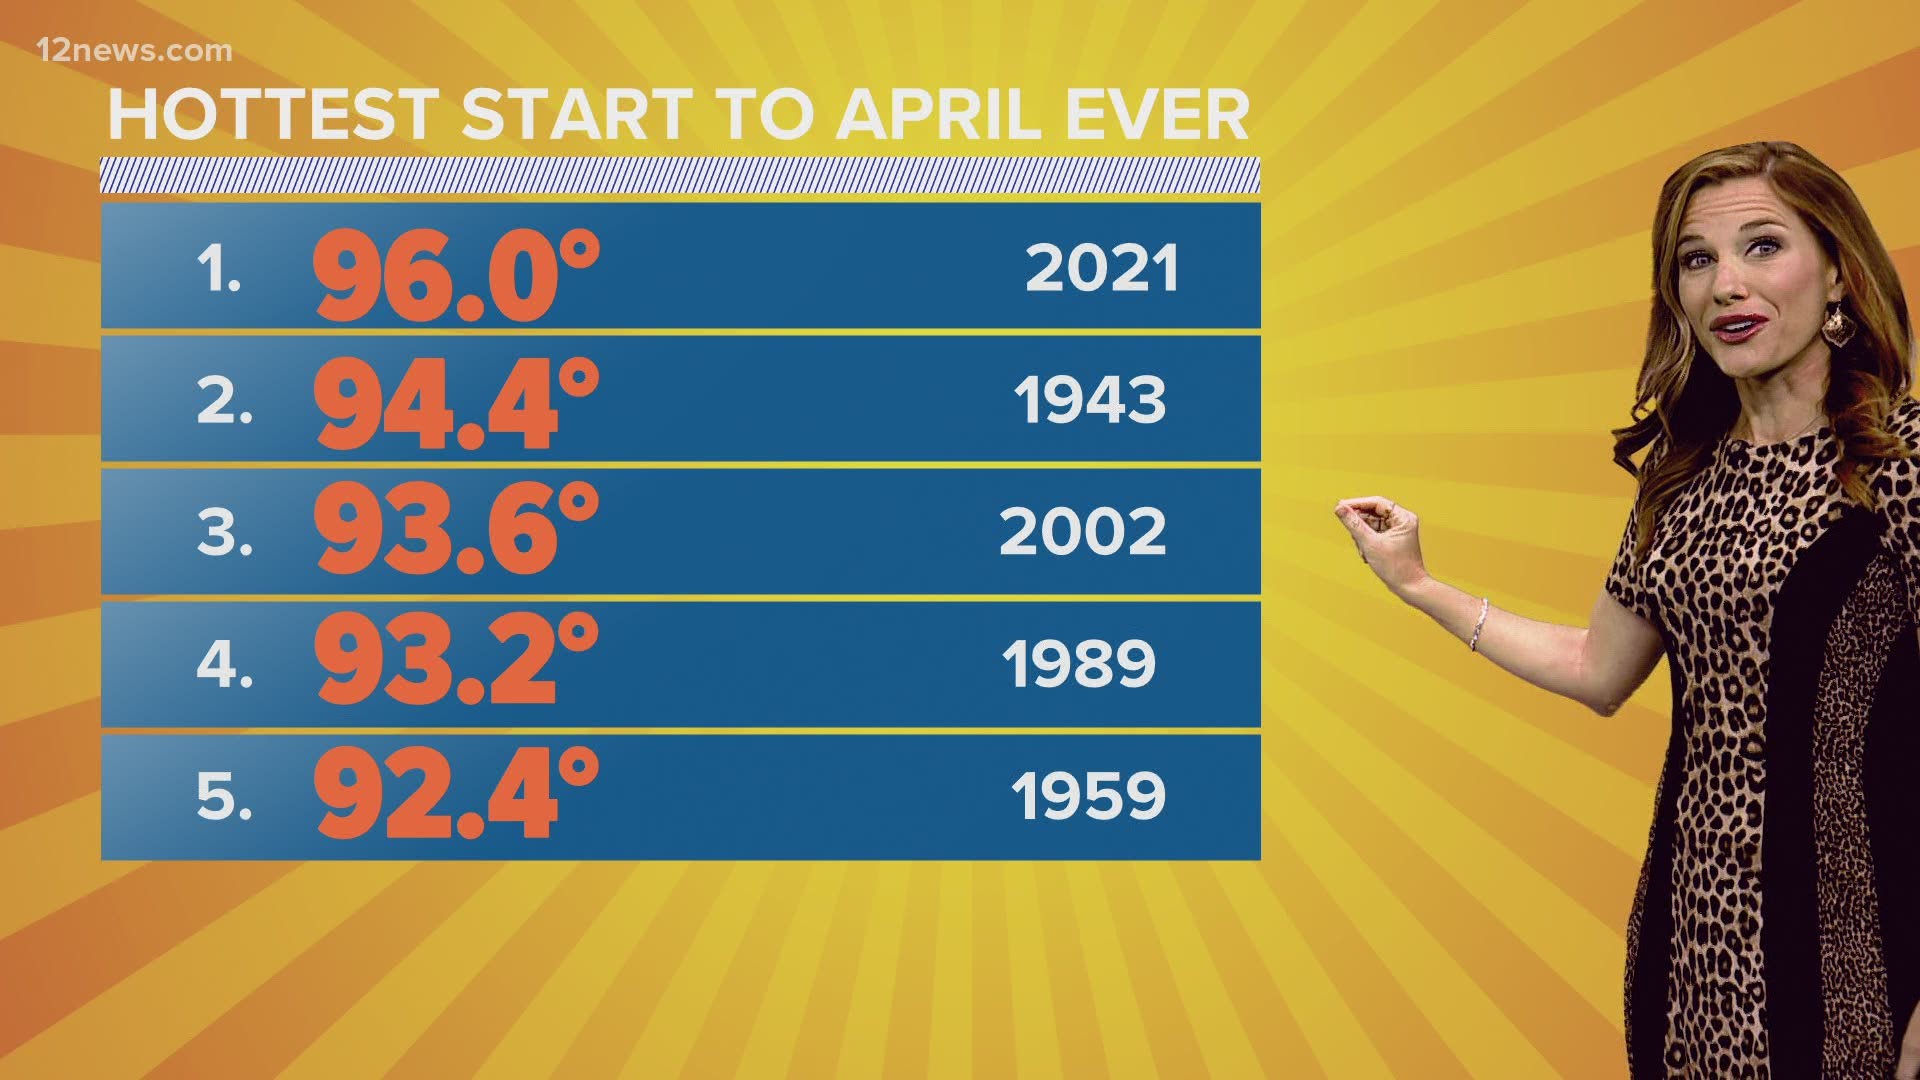 Less than a week into April and the Phoenix area is already seeing record-breaking heat. The first five days of the month in Phoenix were the warmest on record.